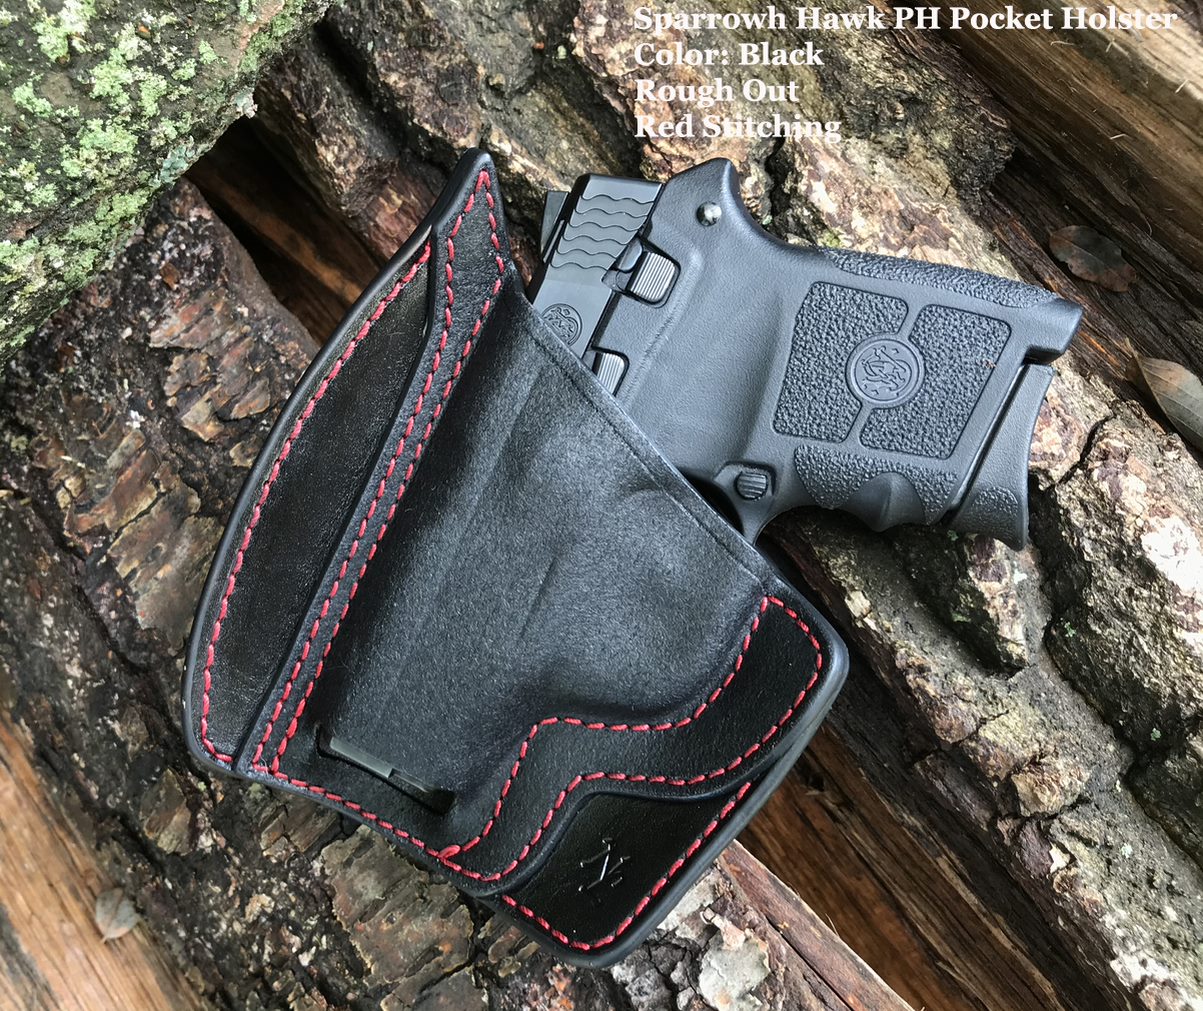 THE BEST POCKET HOLSTER FOR THE RUGER SECURITY 9 COMPACT